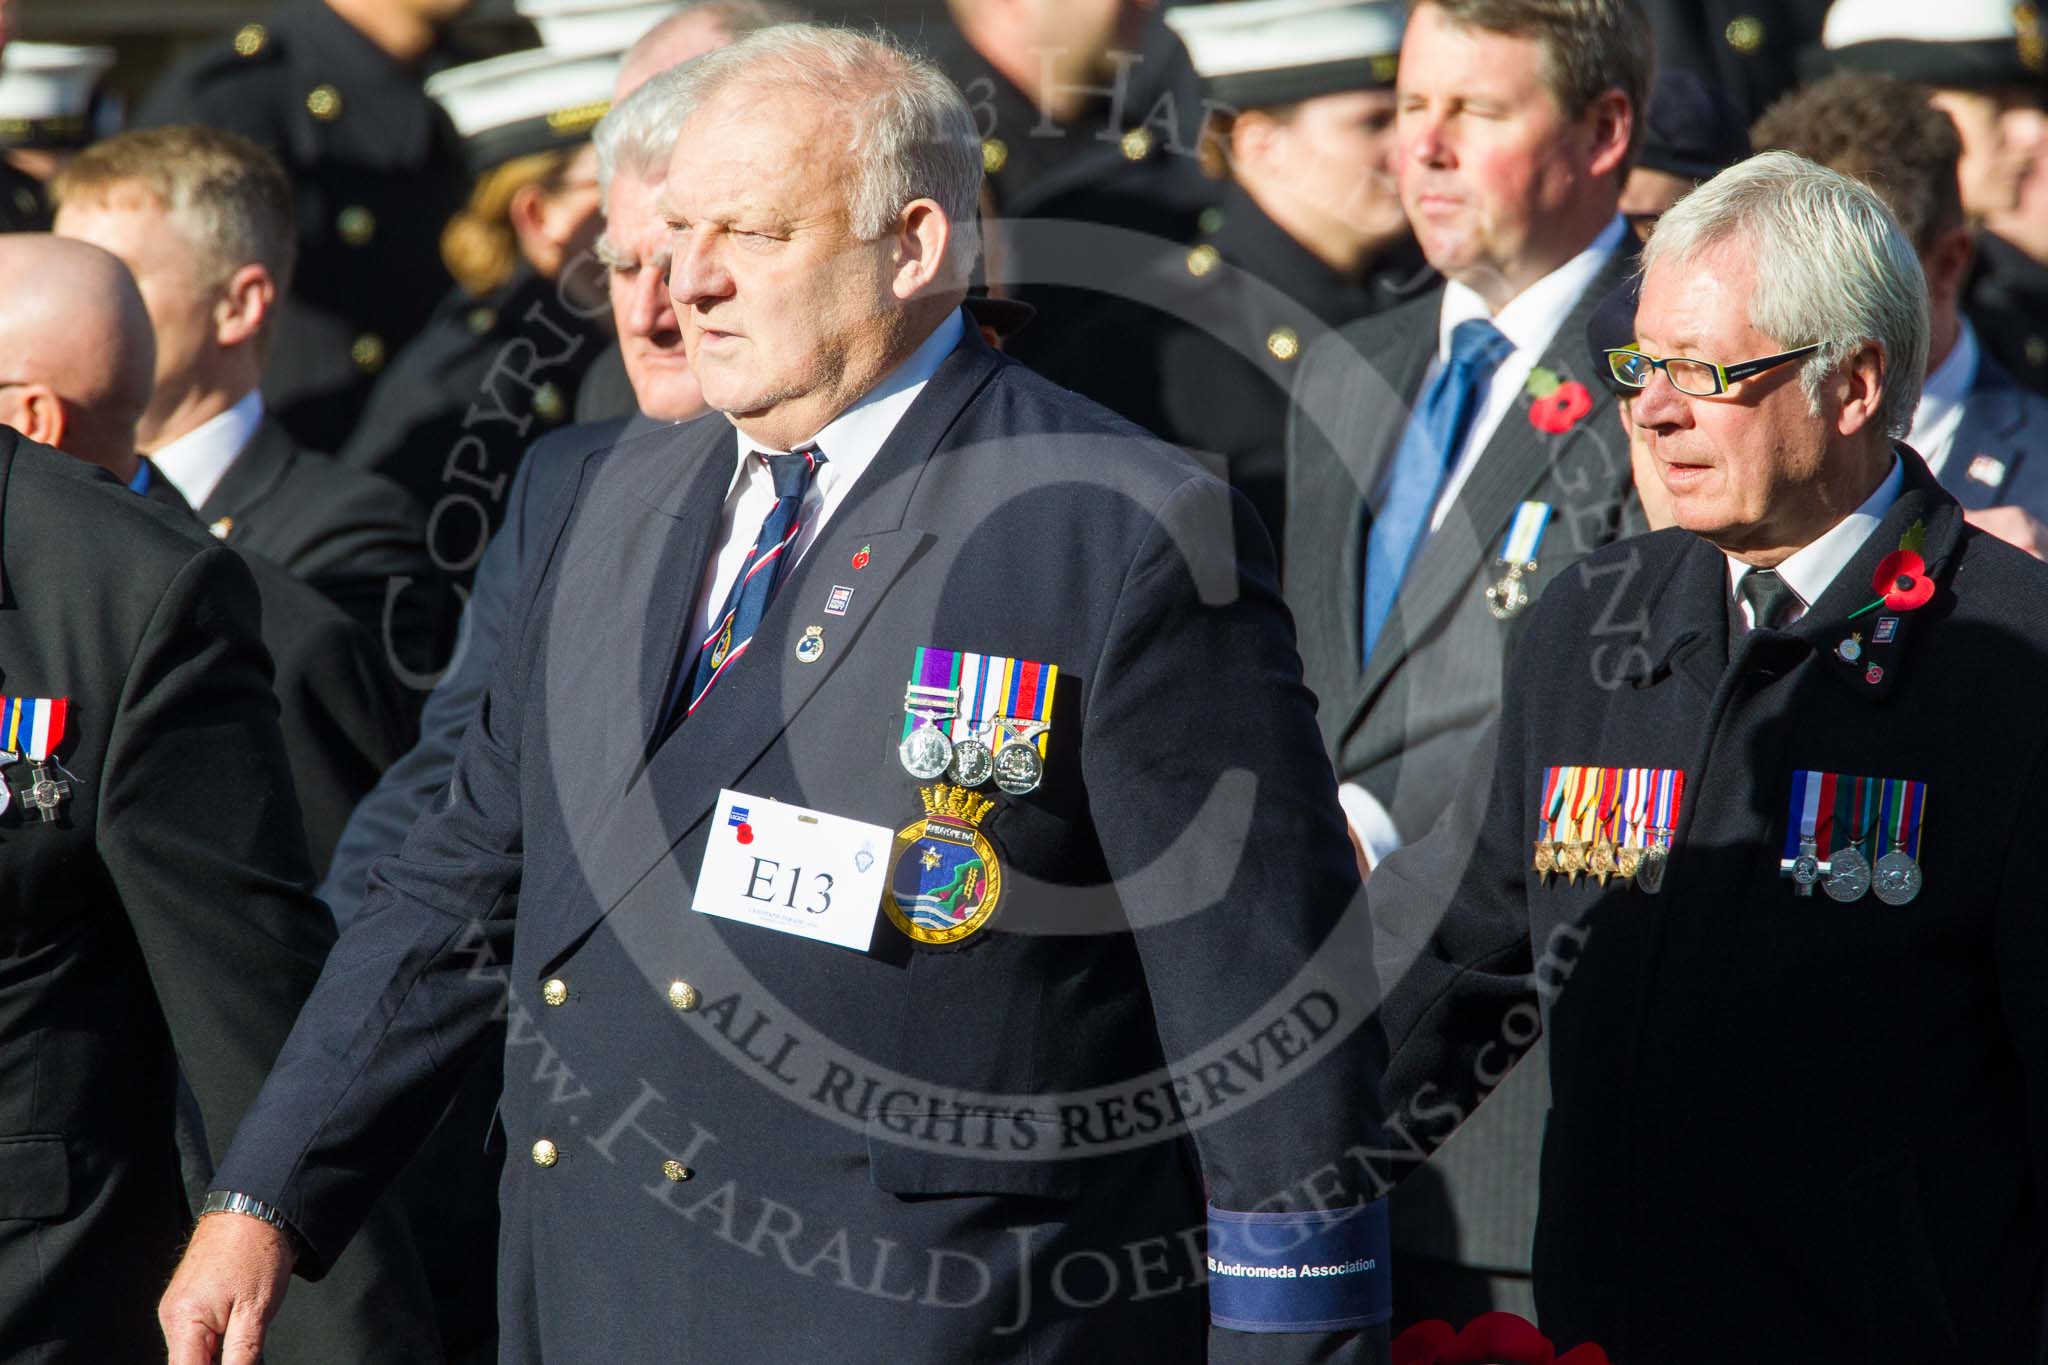 Remembrance Sunday at the Cenotaph in London 2014: Group E13 - HMS Andromeda Association.
Press stand opposite the Foreign Office building, Whitehall, London SW1,
London,
Greater London,
United Kingdom,
on 09 November 2014 at 11:51, image #680